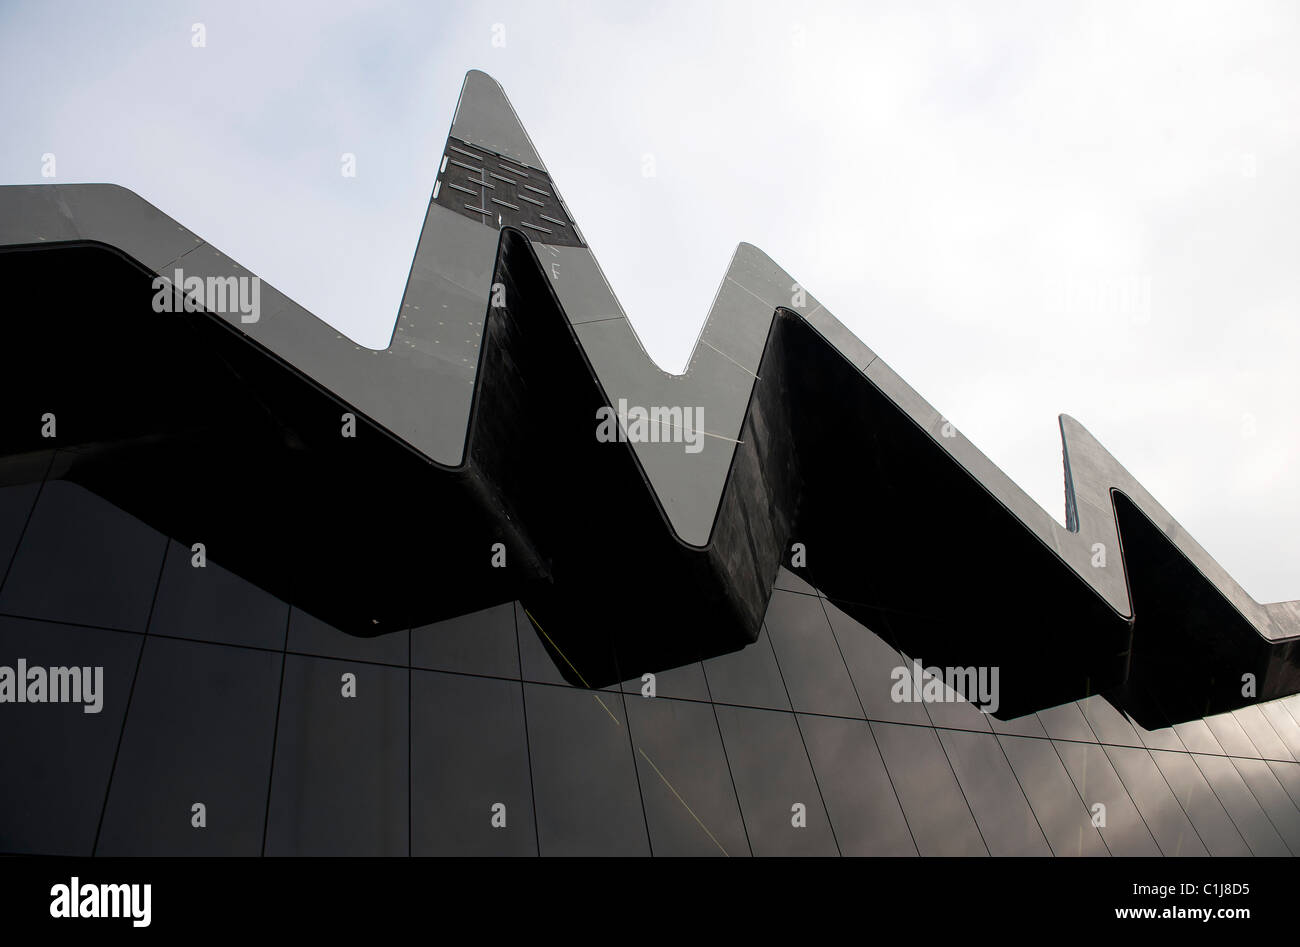 View of the new Glasgow Transport Museum deigned by architect Zaha Hadid on the banks of the River Clyde, Glasgow, Scotland. Stock Photo